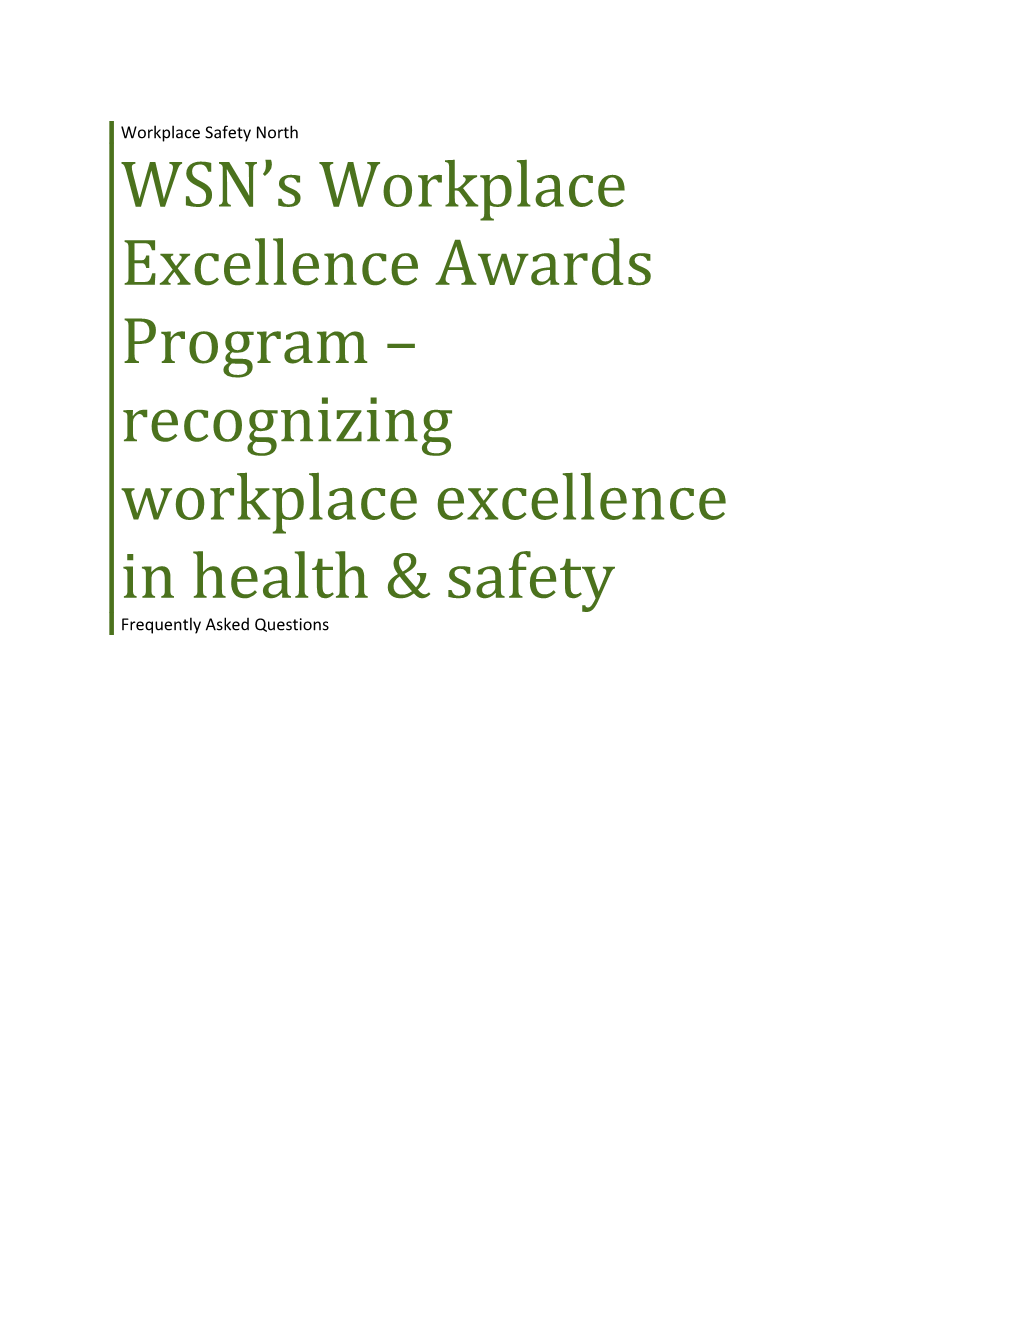 WSN S Workplace Excellence Awards Program Recognizing Workplace Excellence in Health & Safety